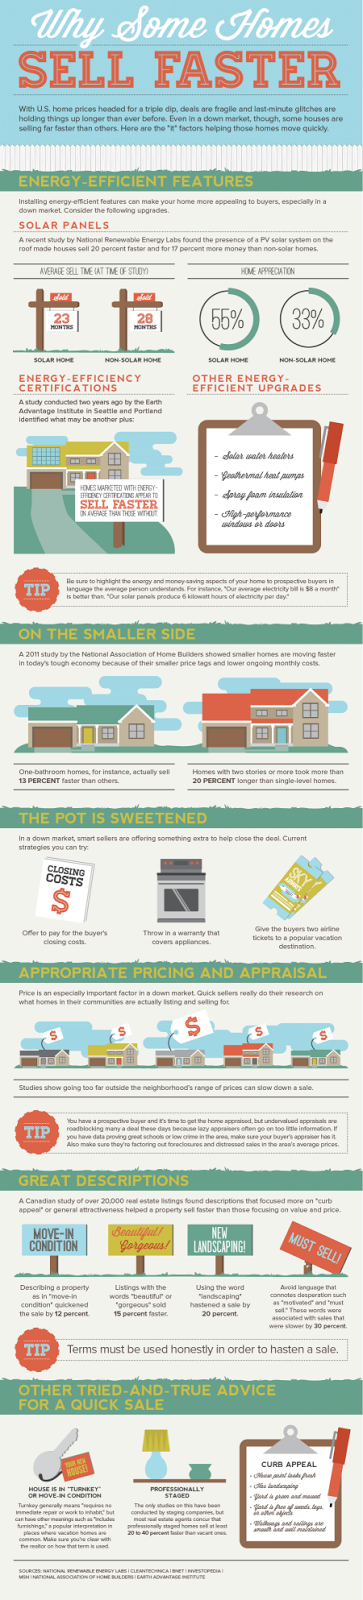 http://1bog.org/blog/infographic-why-some-homes-sell-faster/